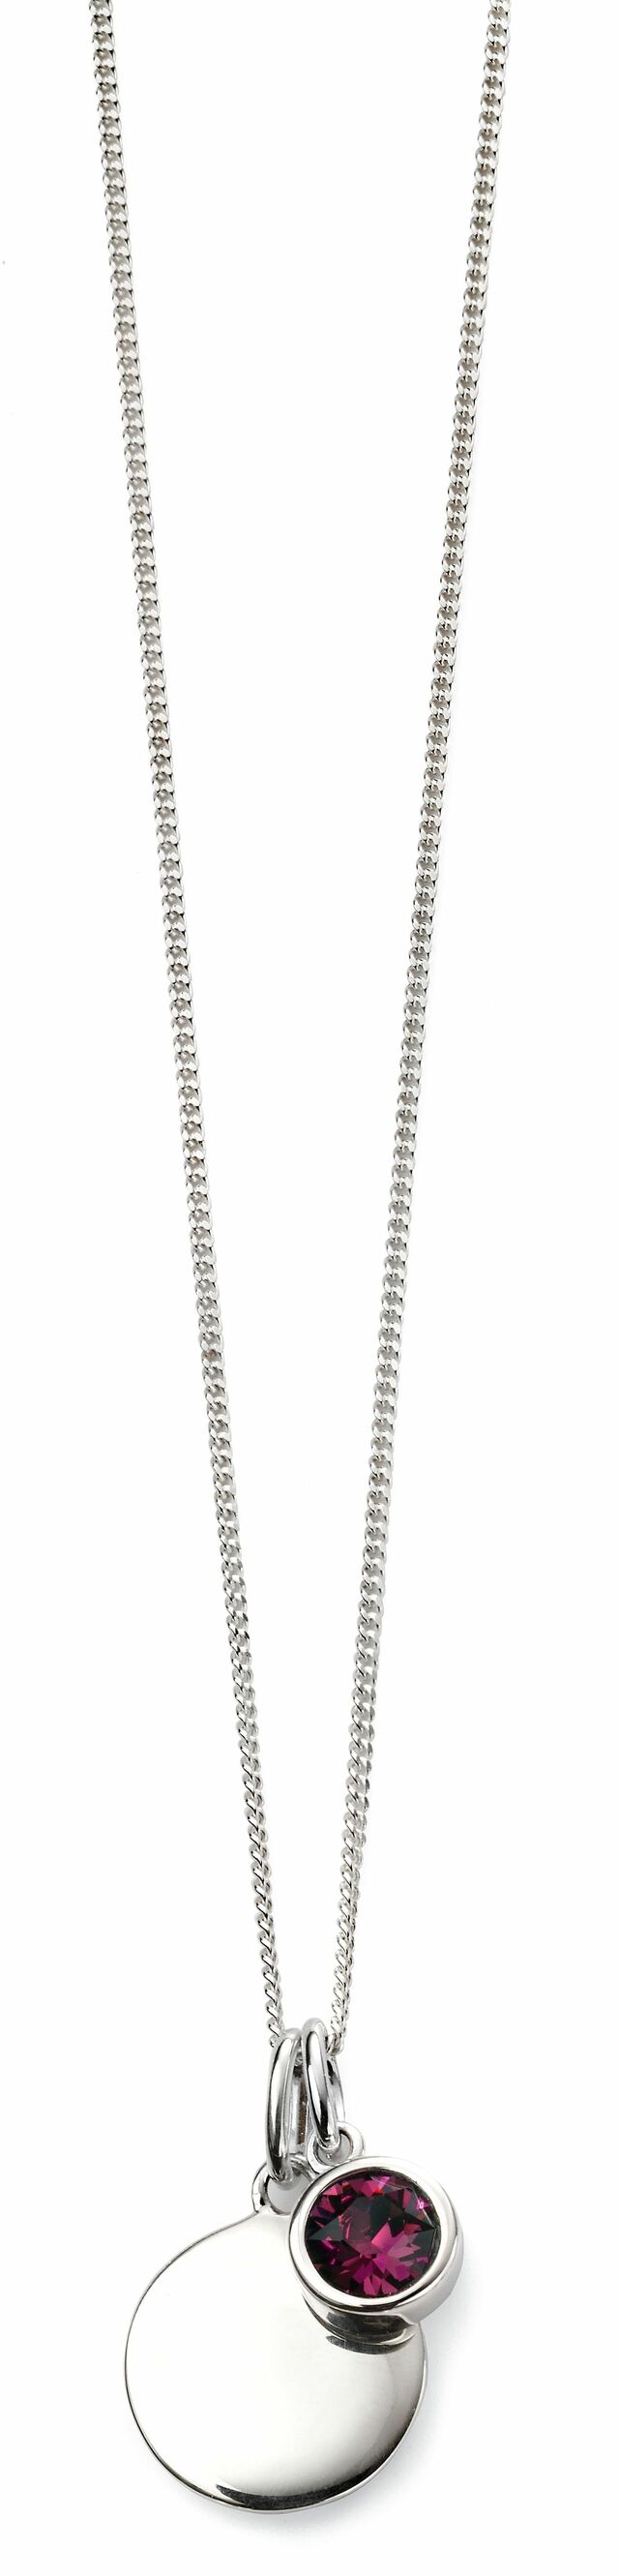 February Silver and Crystals Birthstone Necklace - NB1003 - Hallmark Jewellers Formby & The Jewellers Bench Widnes